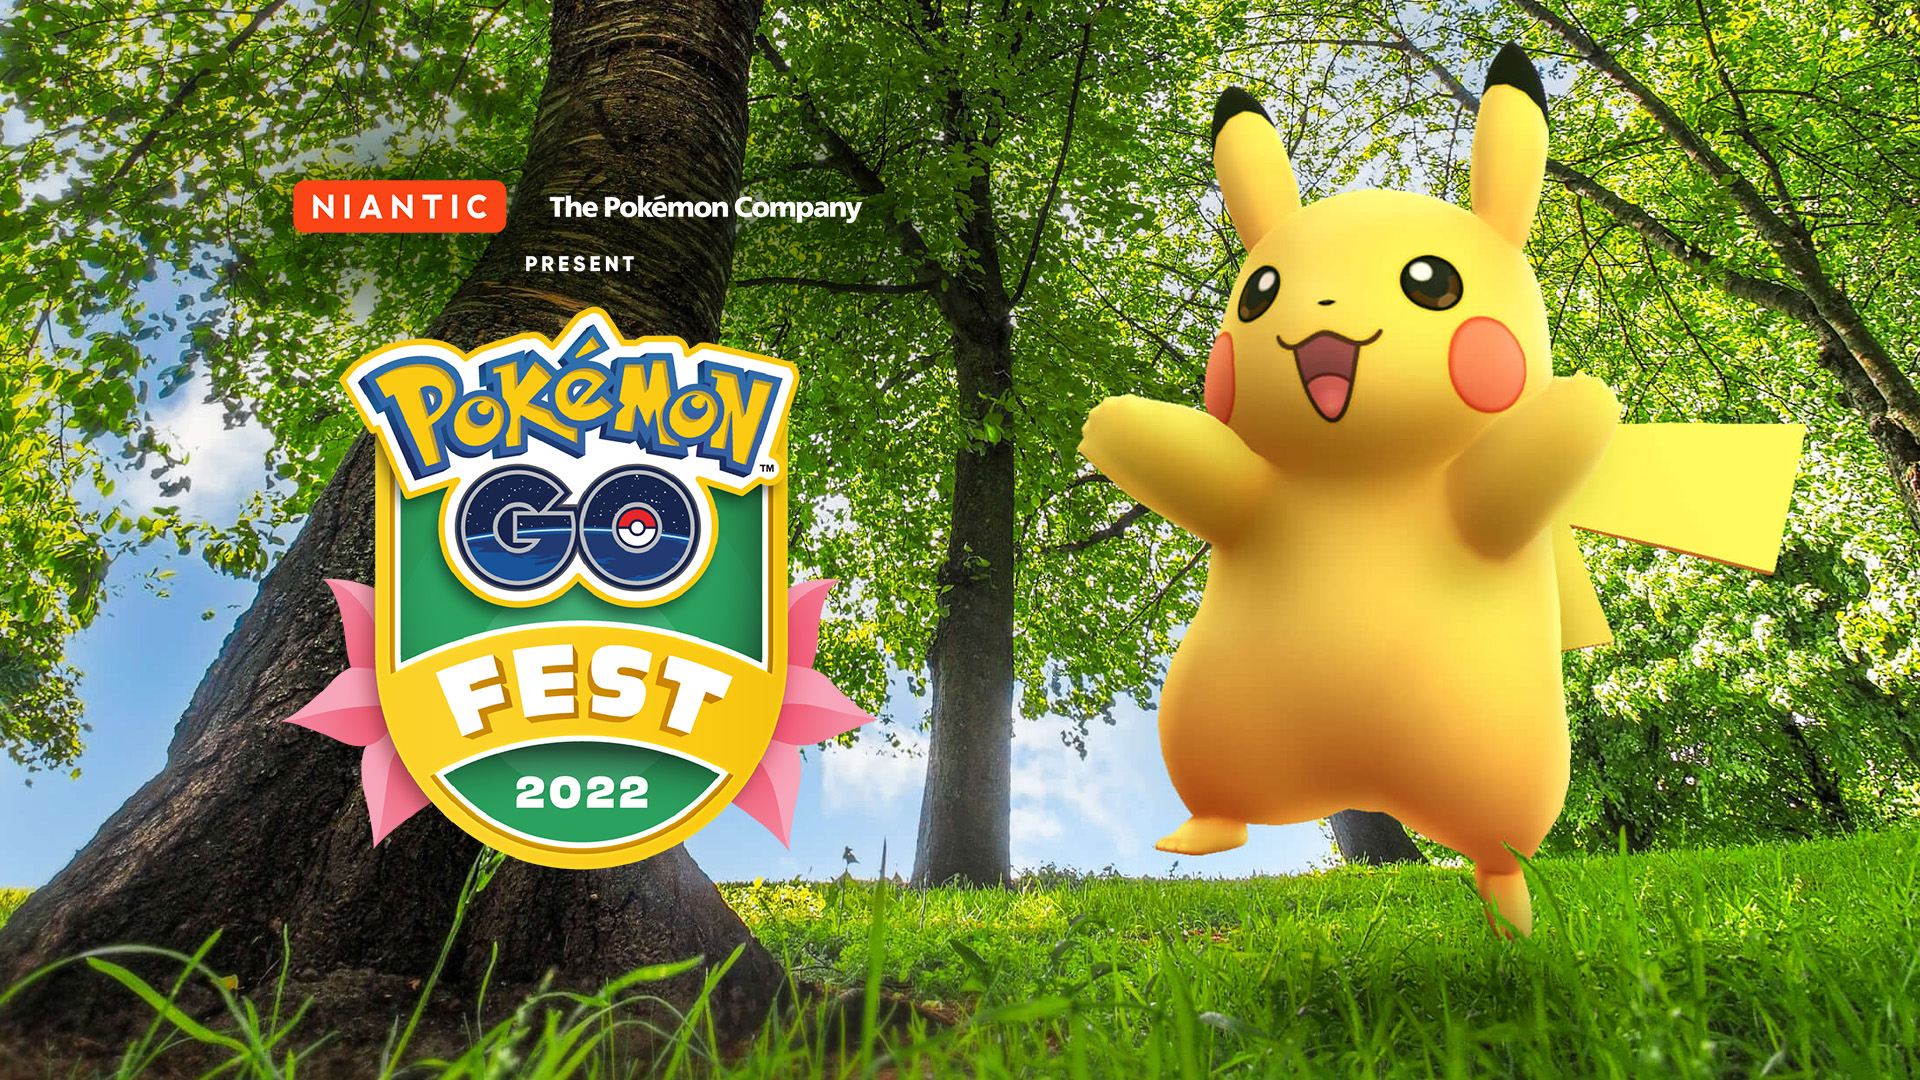 Artwork of Pikachu in a forest and a Pokémon Go Fest 2022 logo